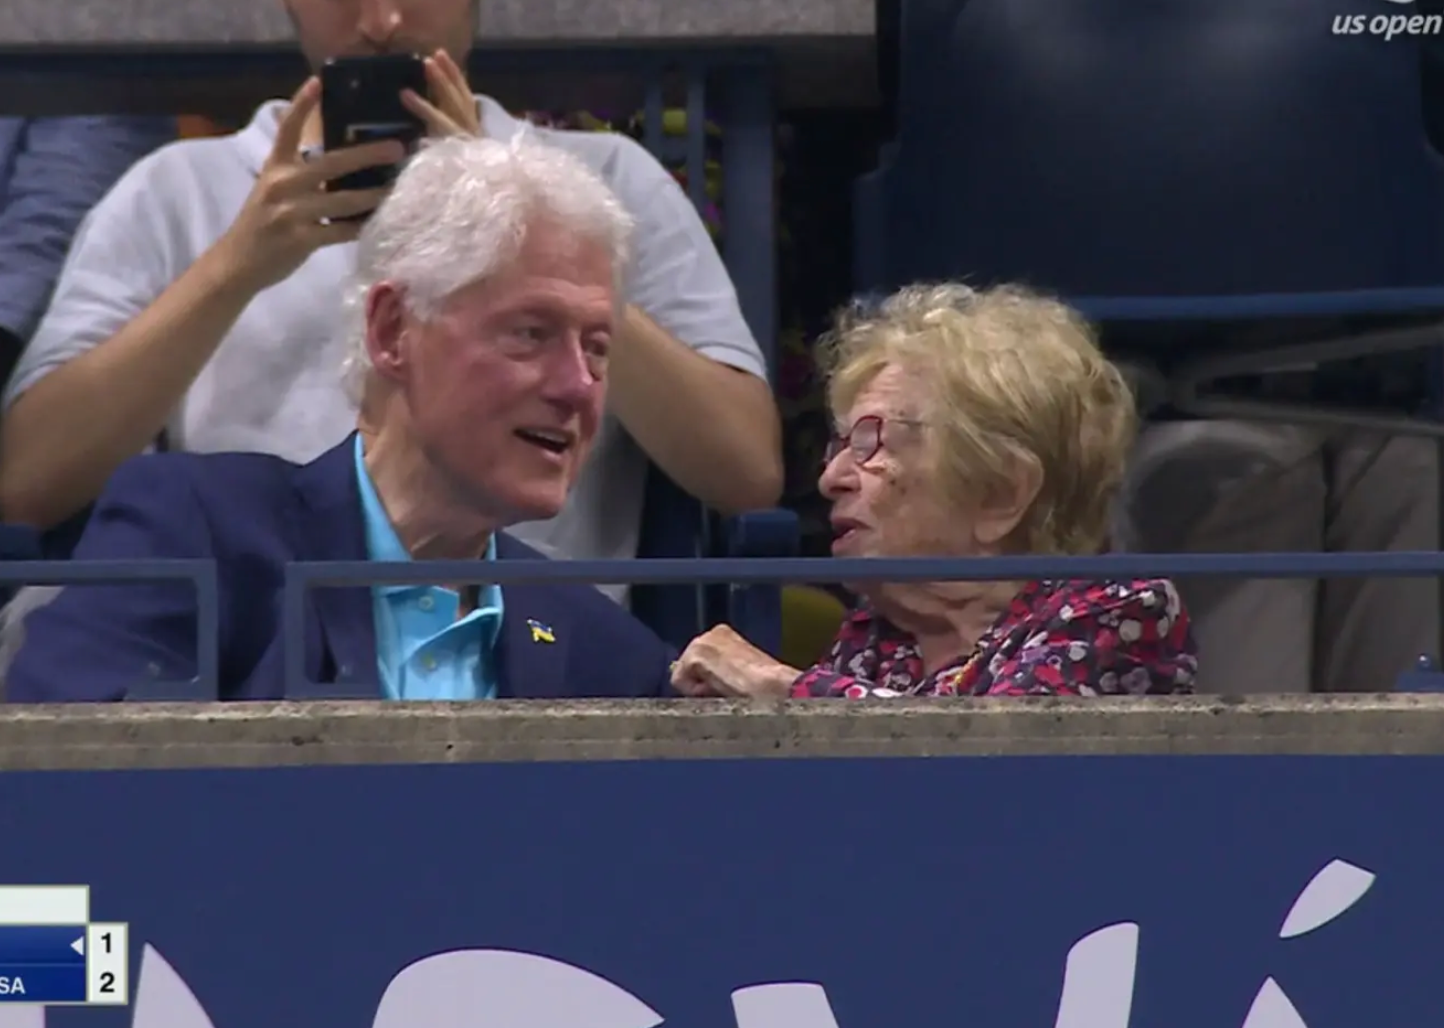 Former President Bill Clinton and Dr Ruth Westheimer caused a stir at the US Open on Monday night